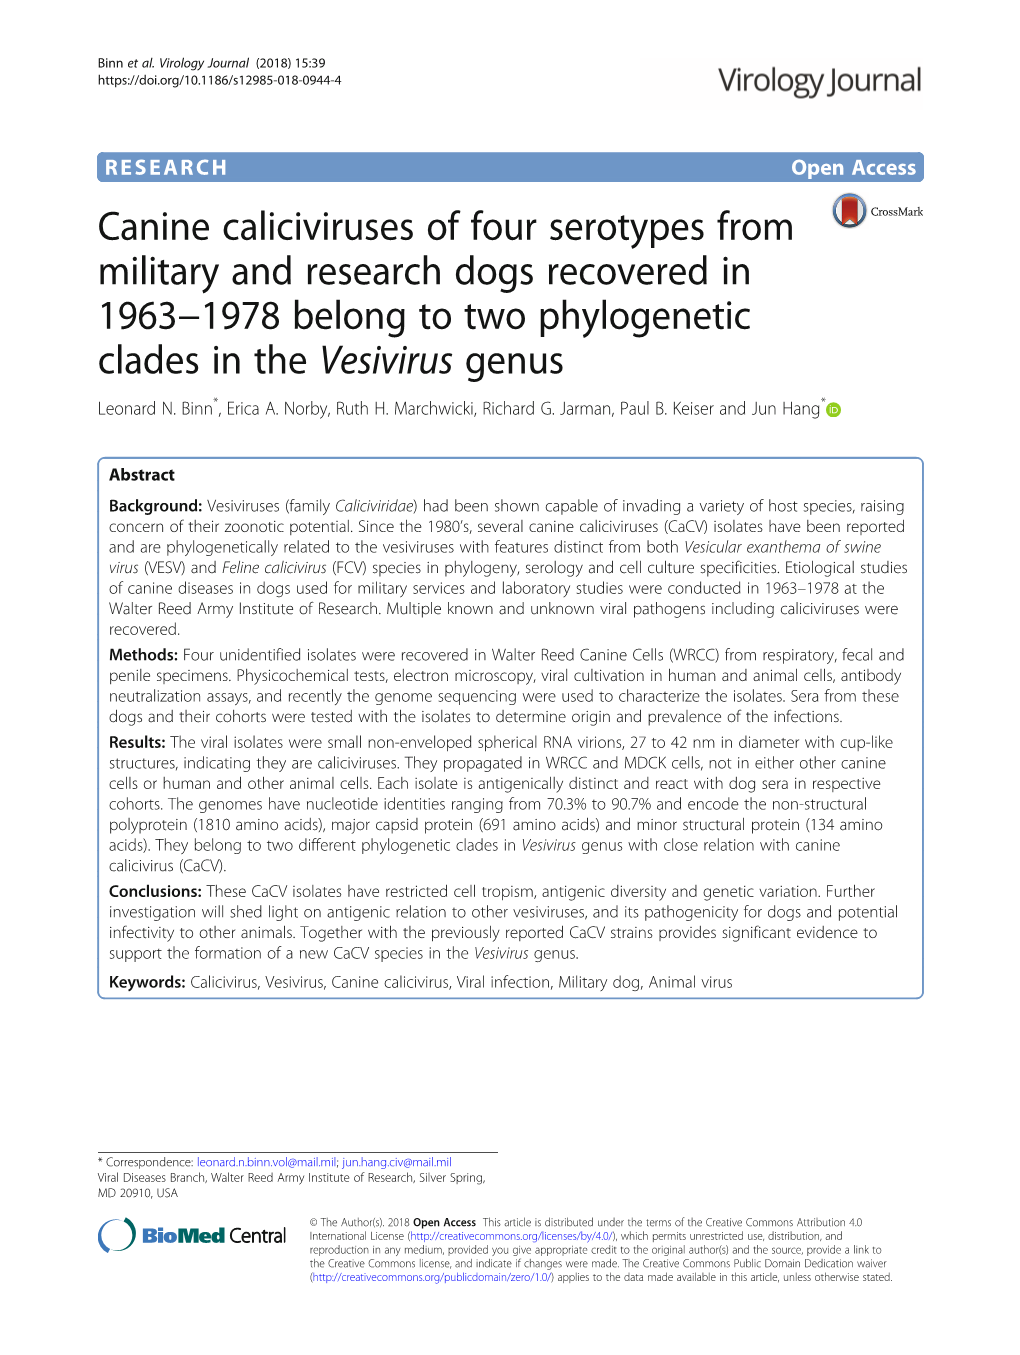 Canine Caliciviruses of Four Serotypes from Military and Research Dogs Recovered in 1963−1978 Belong to Two Phylogenetic Clades in the Vesivirus Genus Leonard N